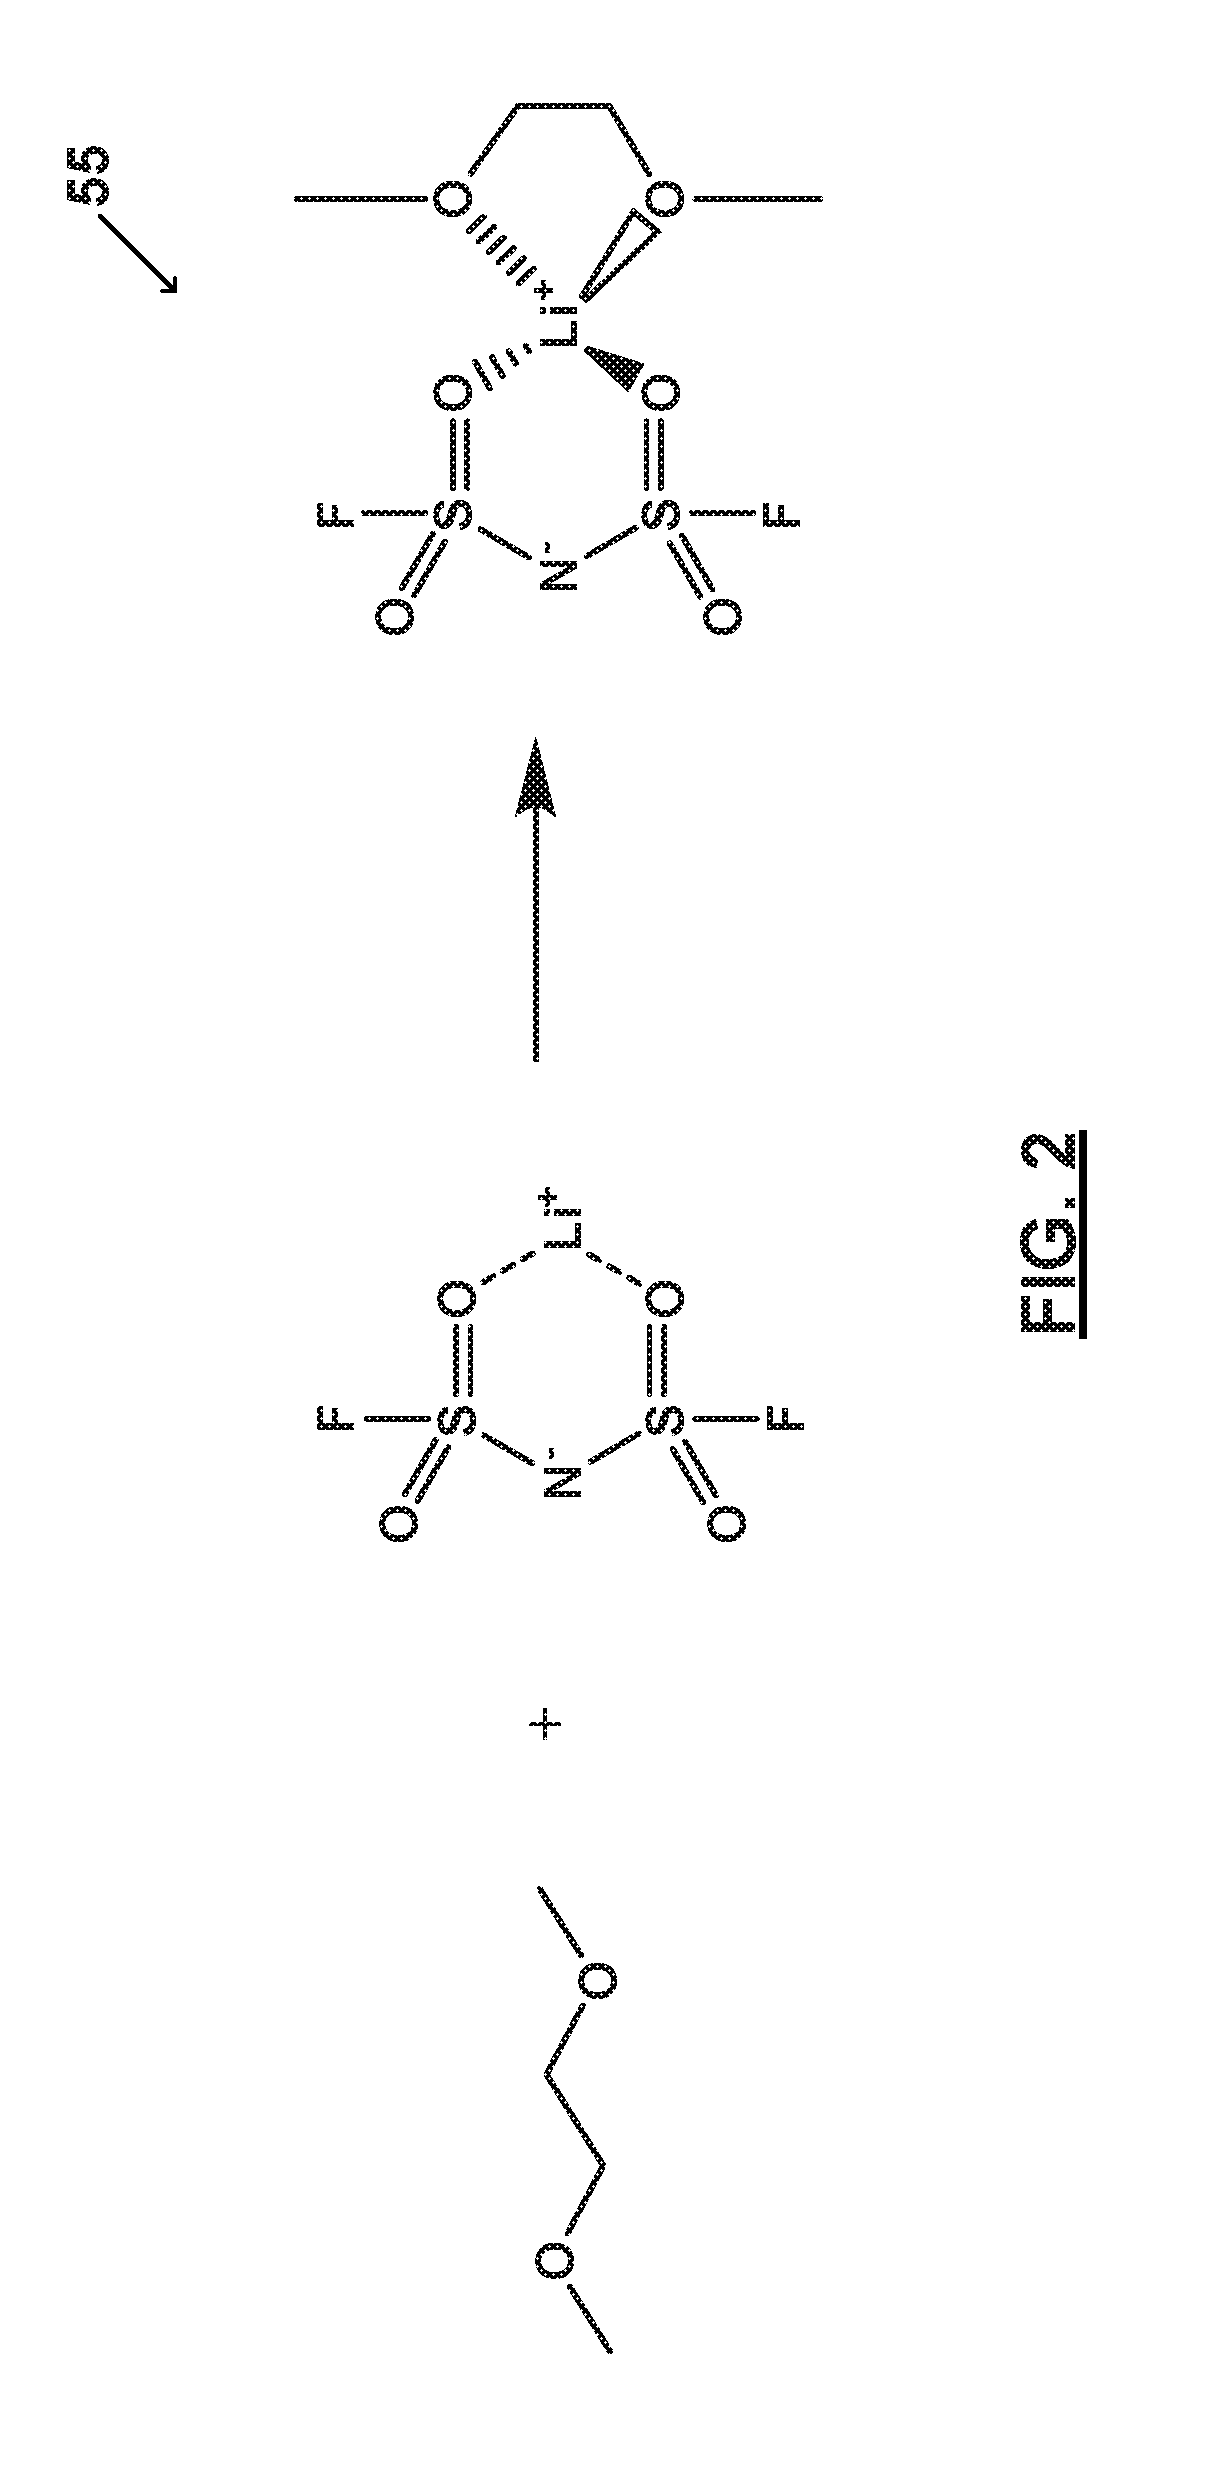 Ether-based electrolyte system improving or supporting anodic stability of electrochemical cells having lithium-containing anodes